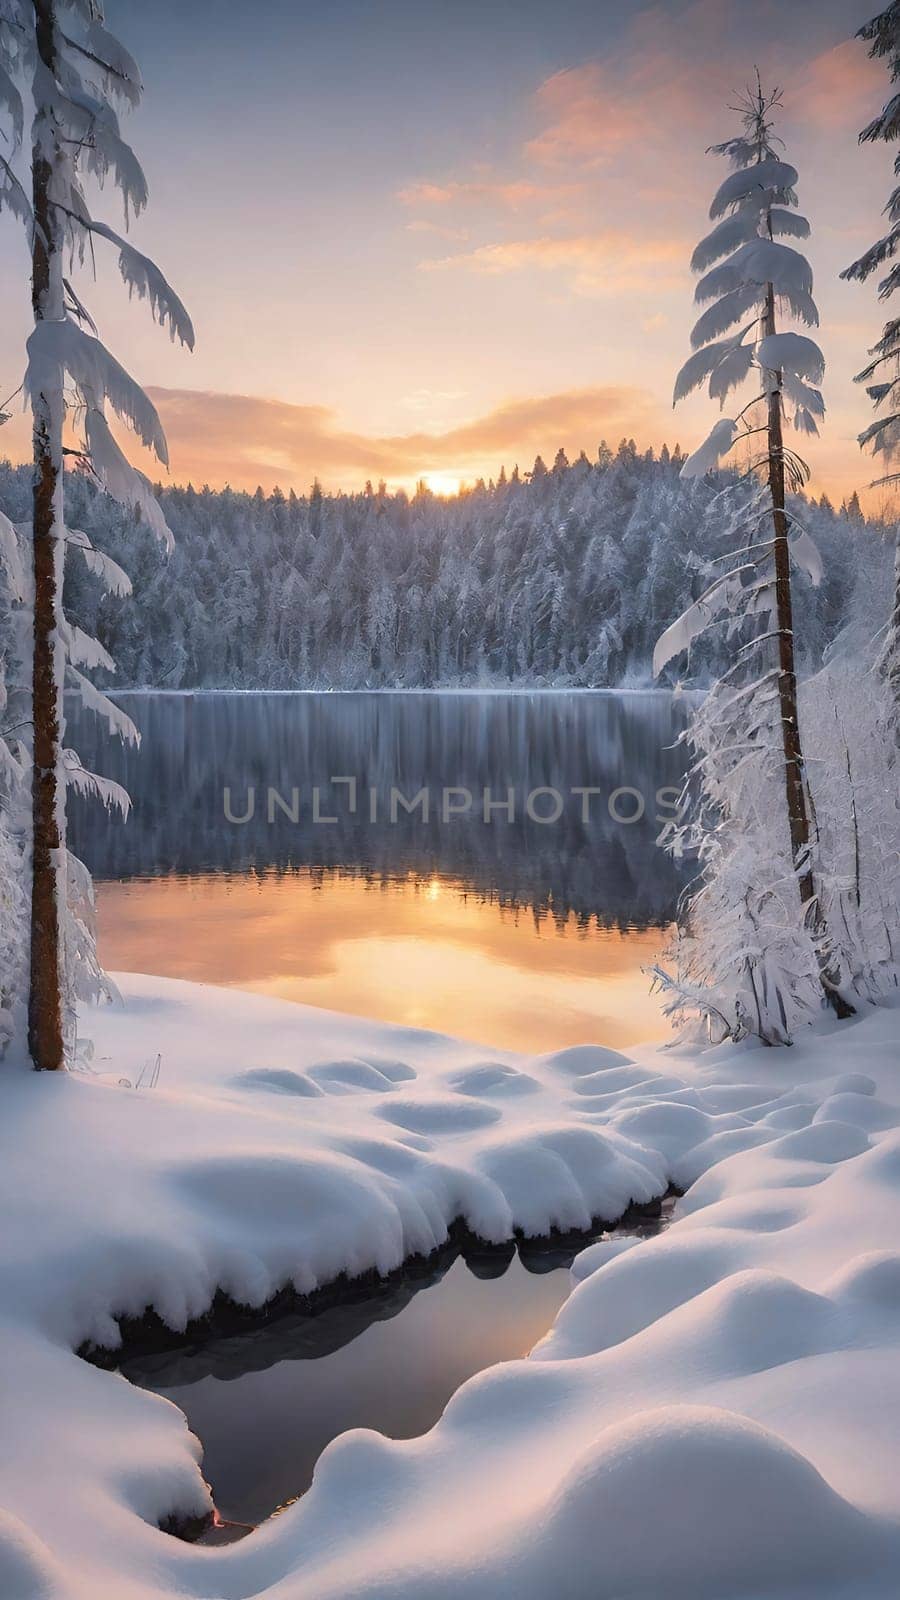 Winter landscape with snow covered trees and river at sunset. Beautiful winter landscape with frozen river and snow covered trees at sunset.Sunset on the river in winter forest. Beautiful winter landscape.Fantastic winter landscape with snow covered trees and river at sunset.